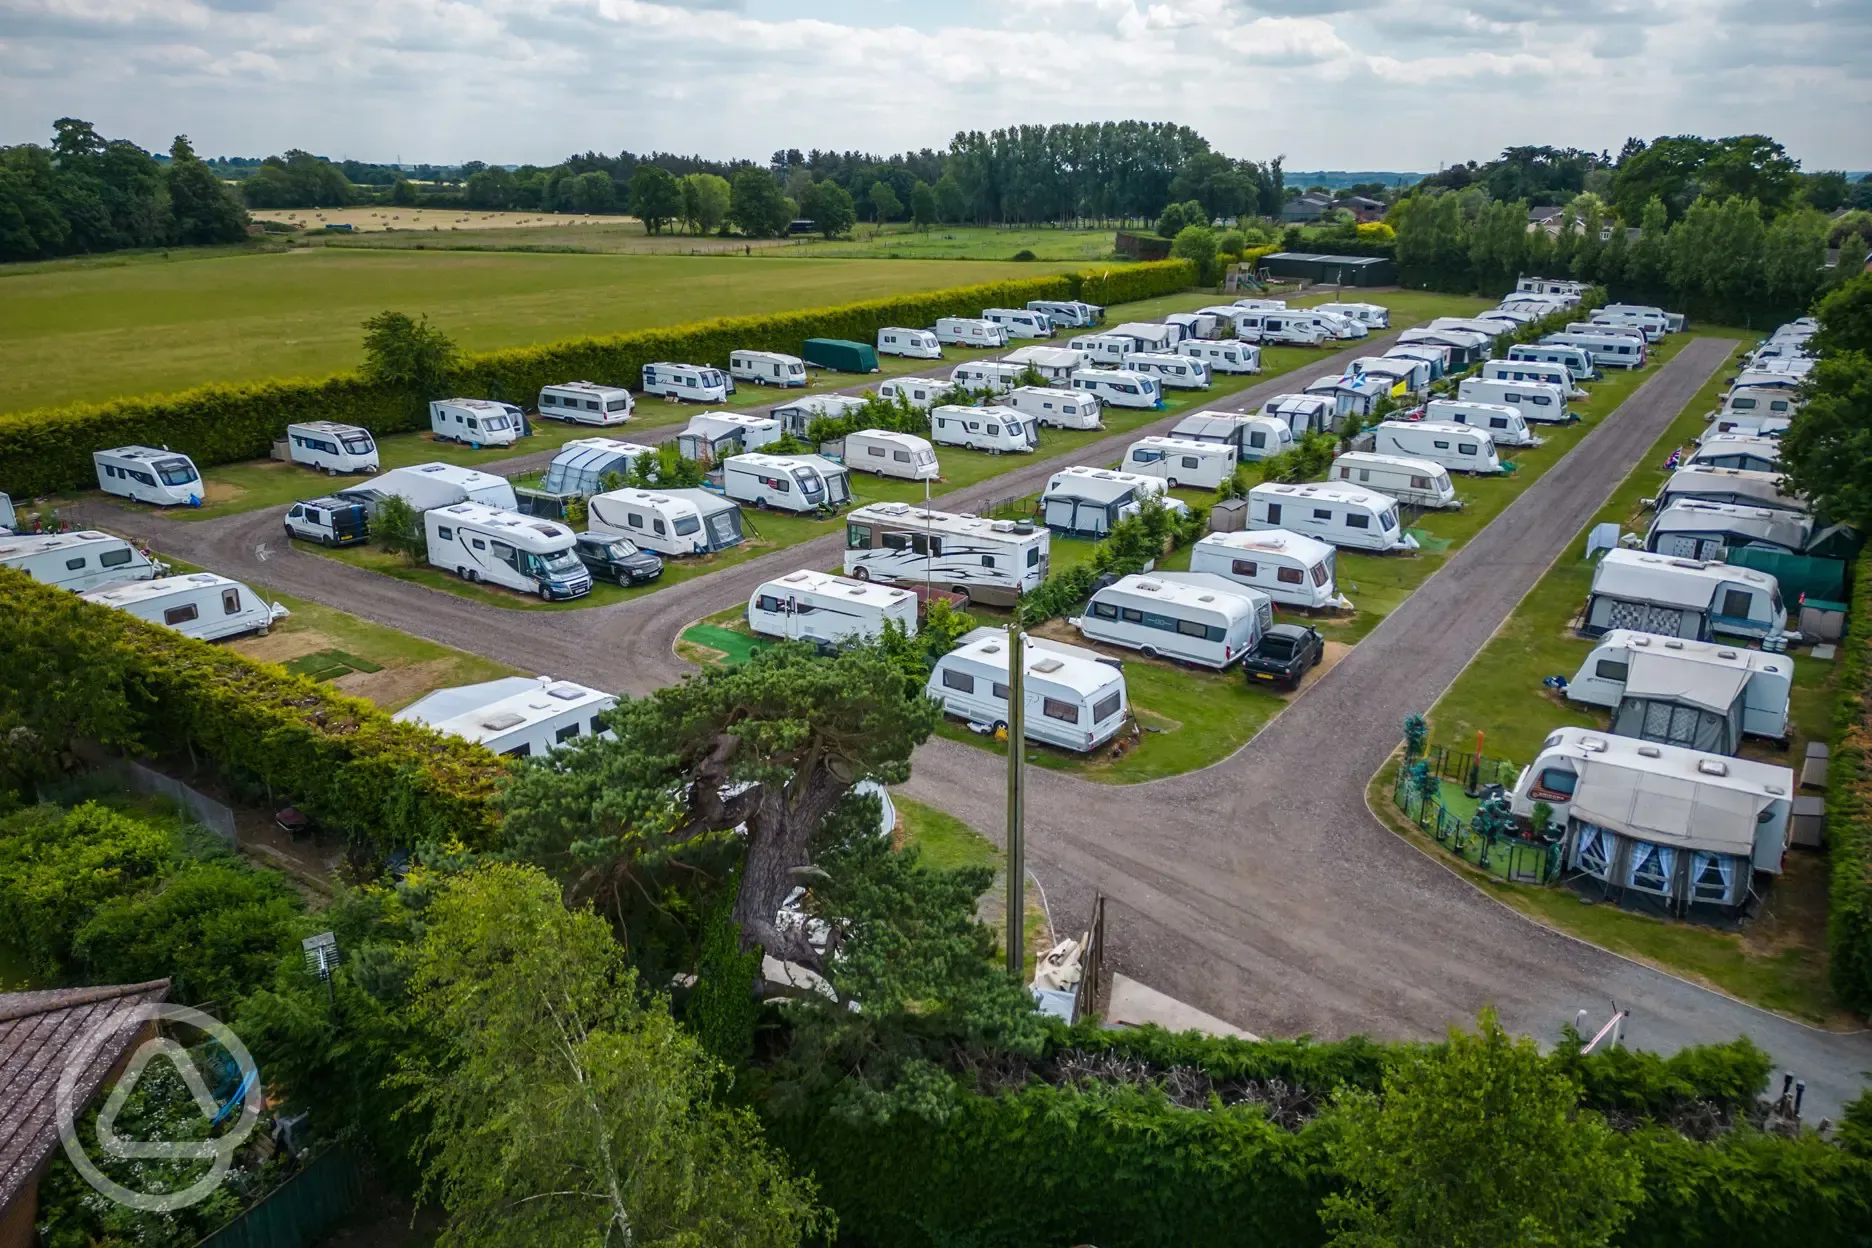 Hardstanding and grass touring pitches